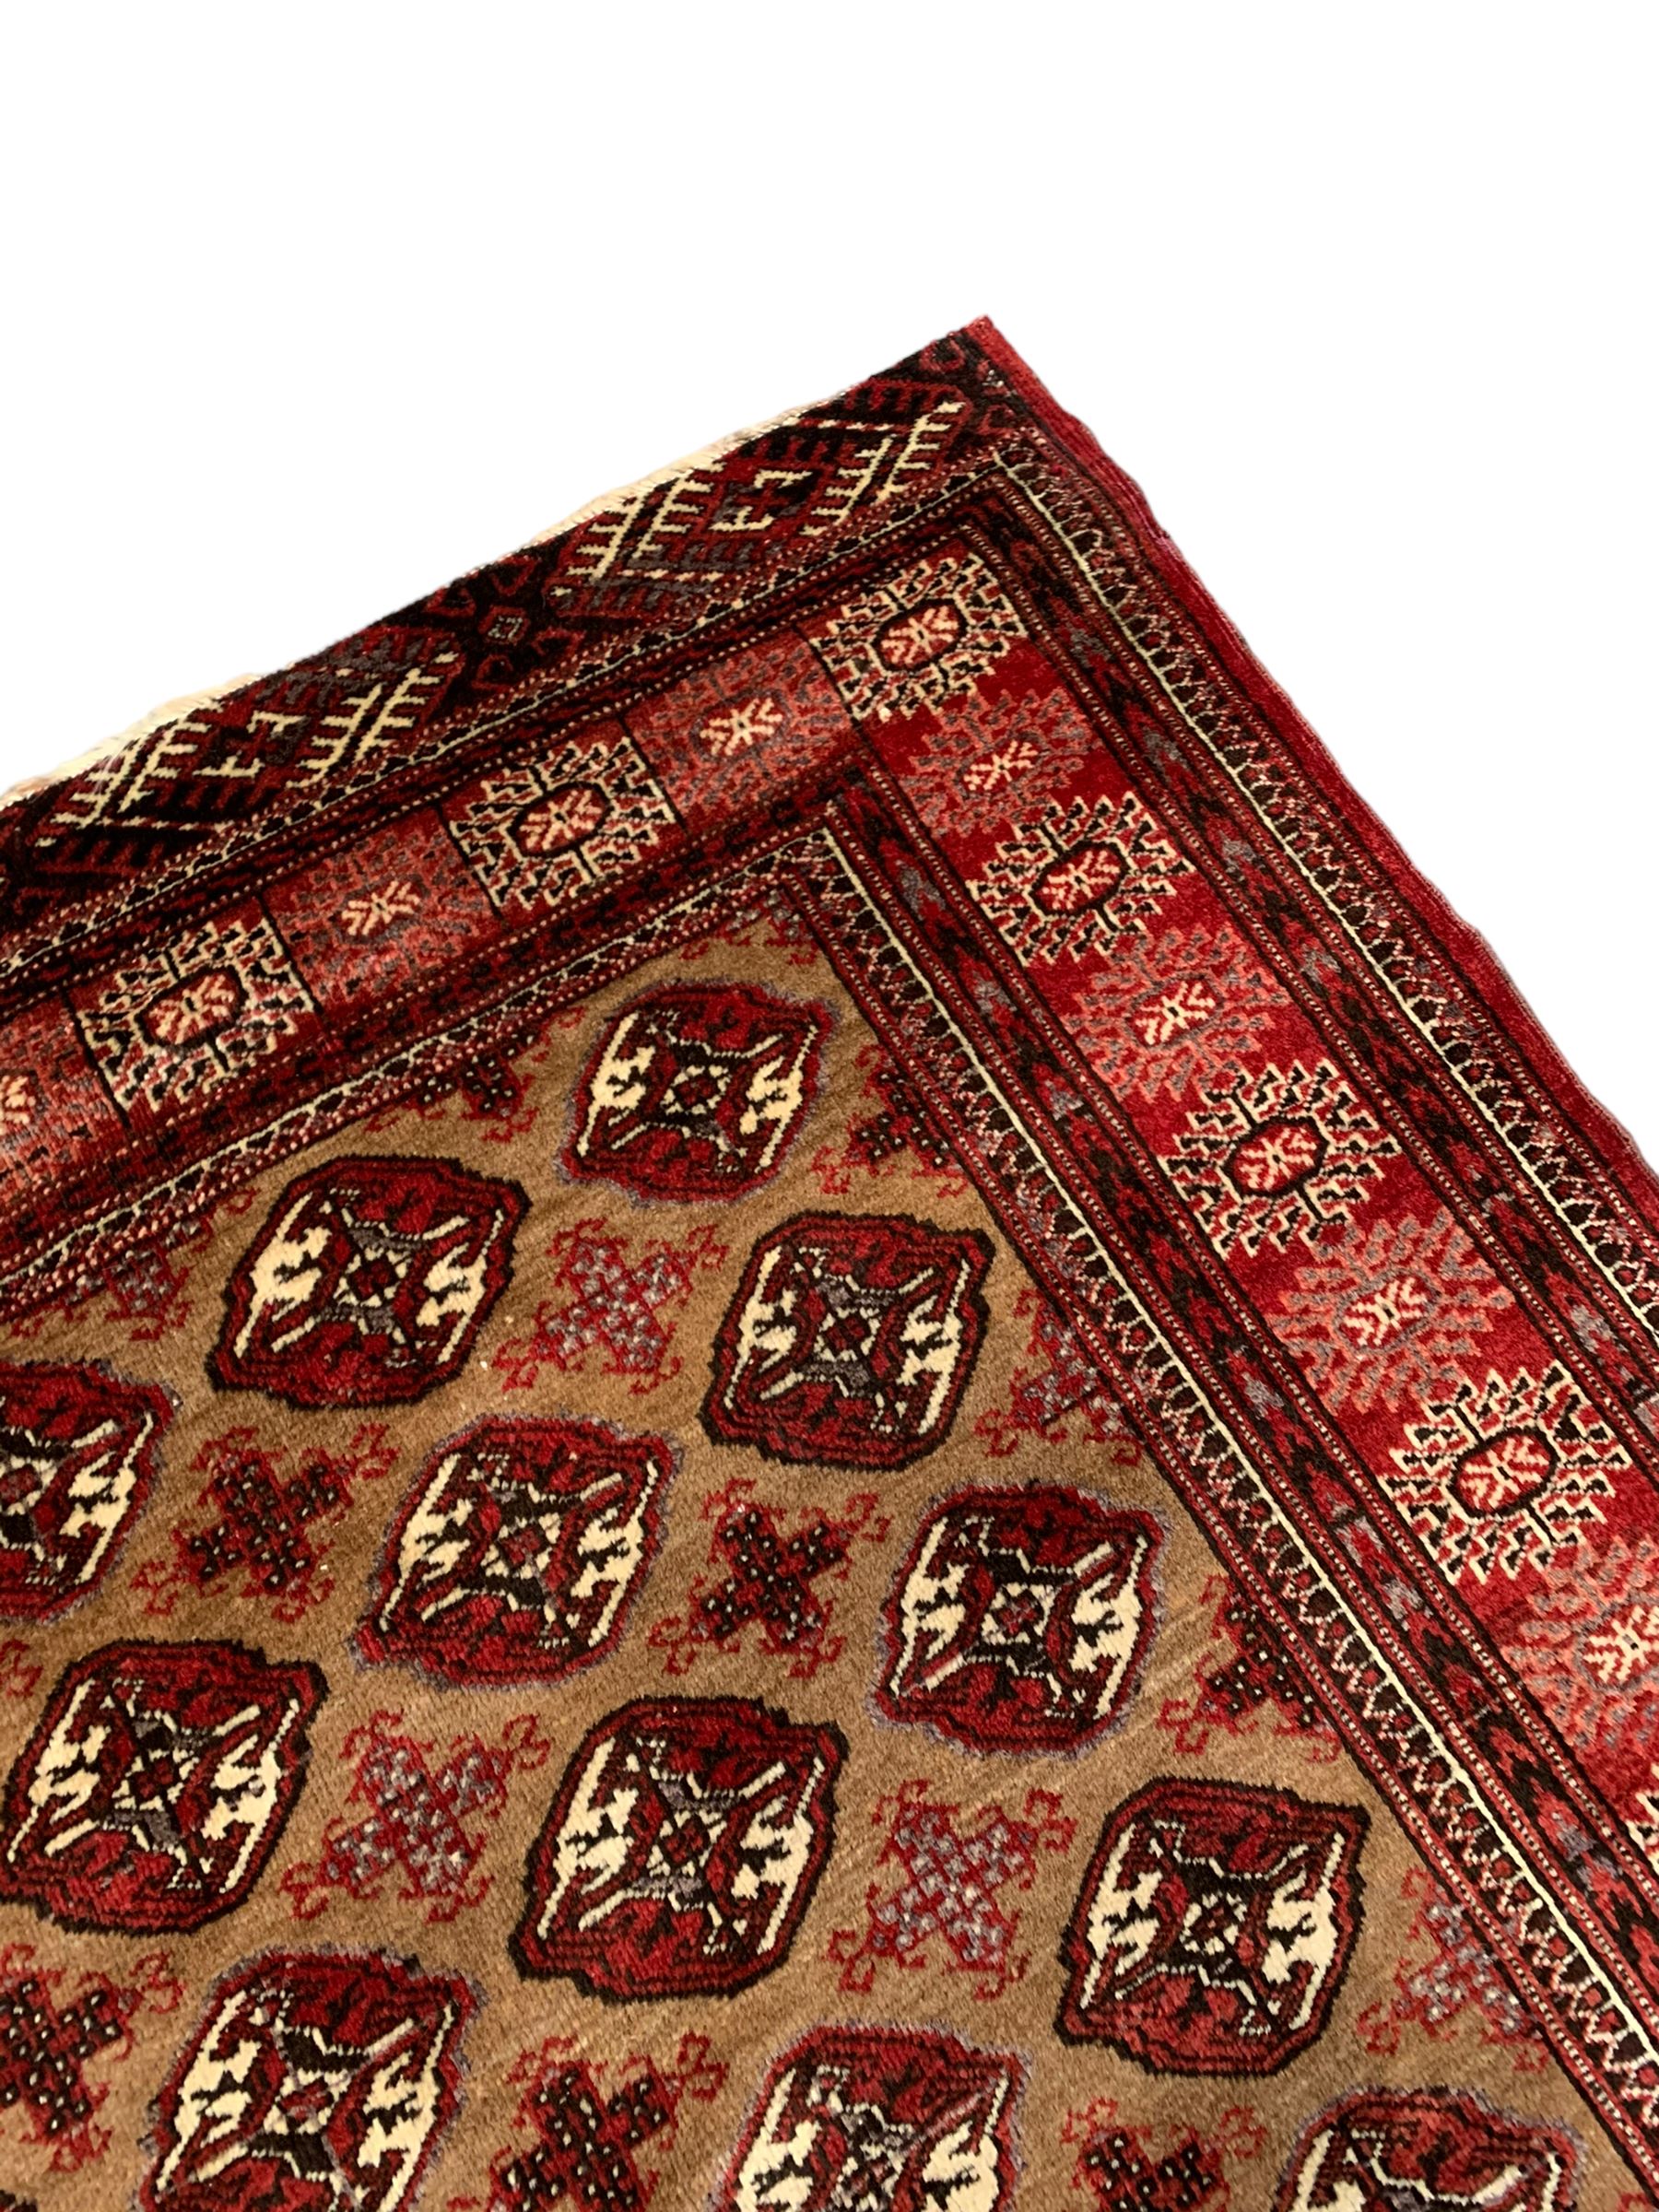 Persian Bokhara red ground rug - Image 5 of 6